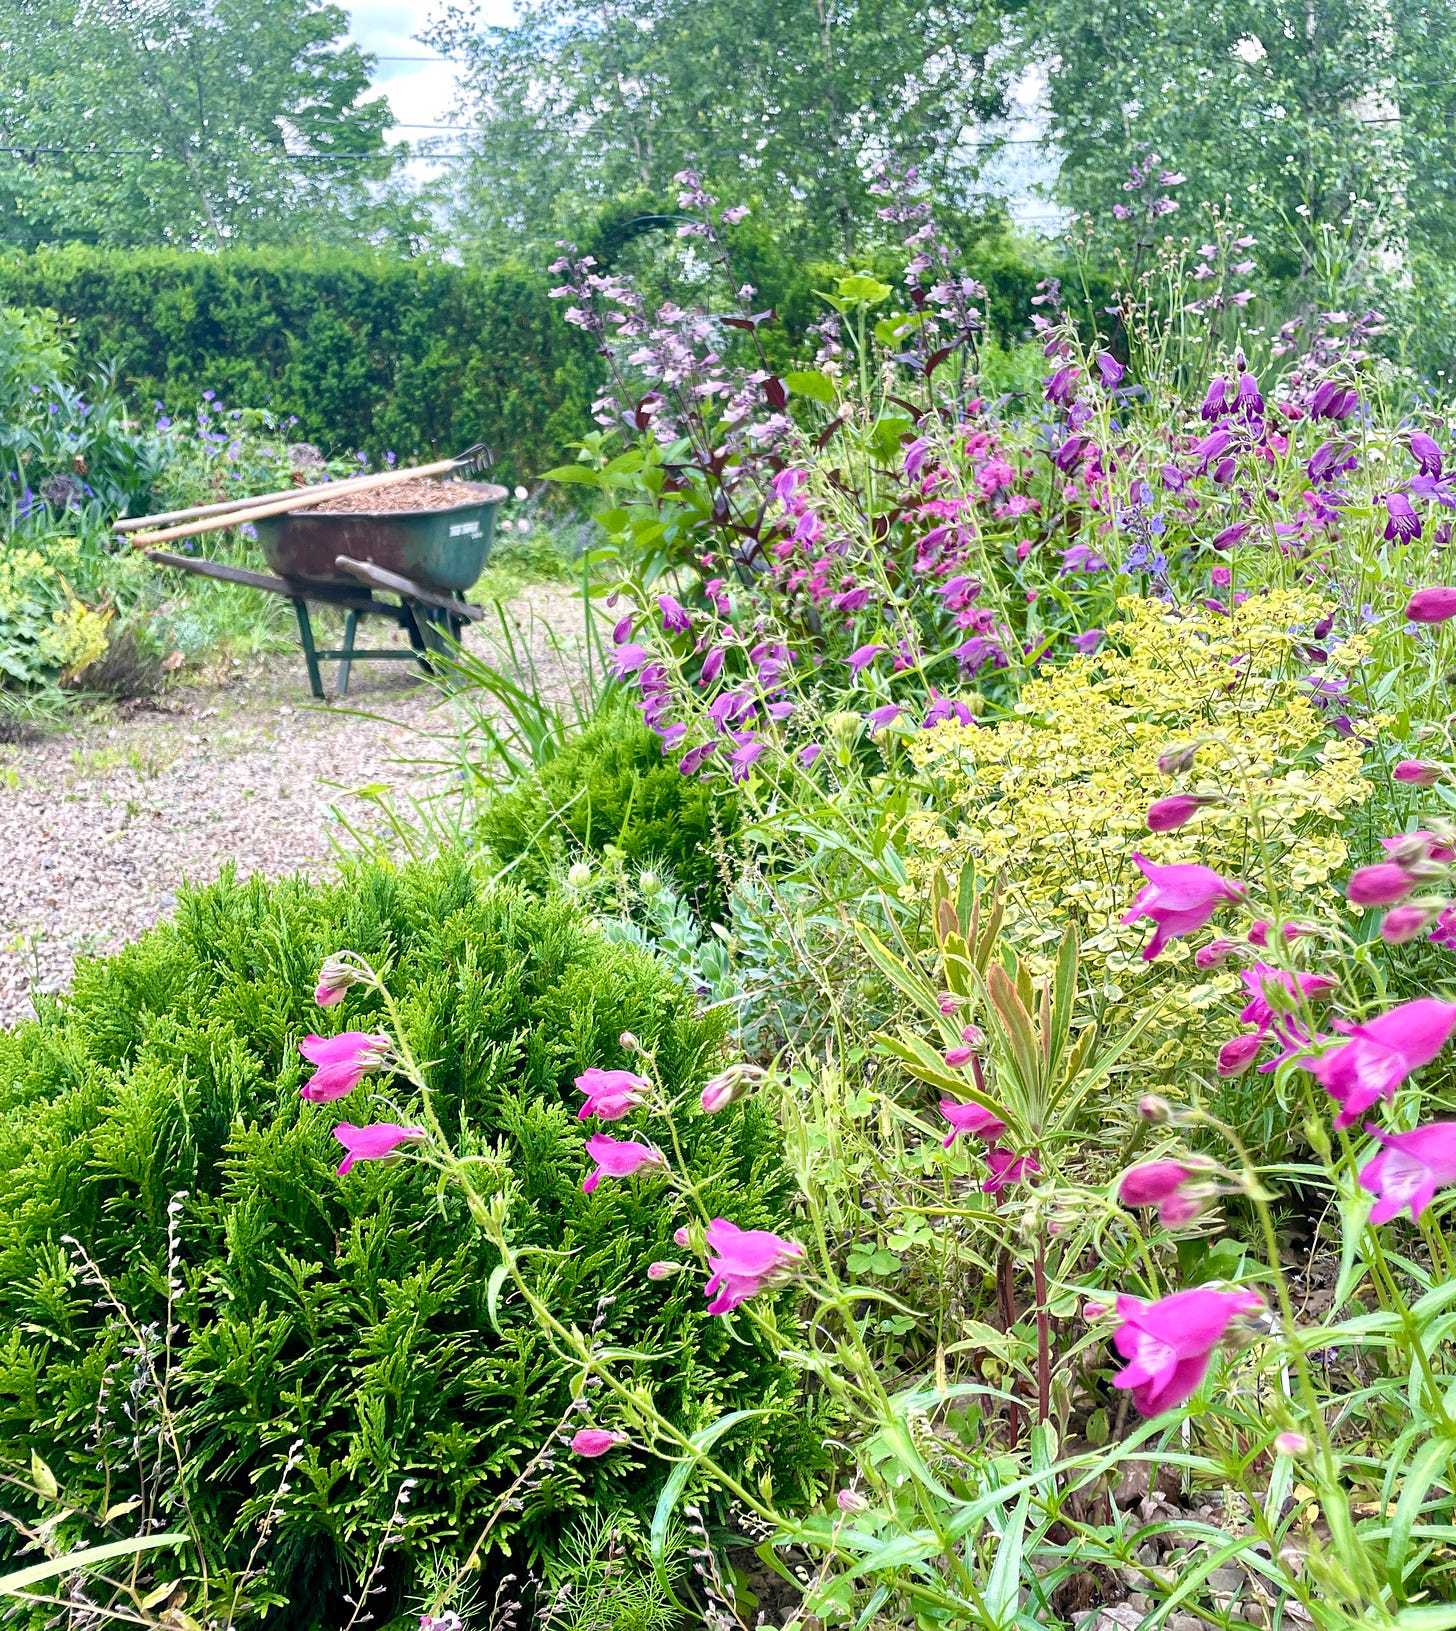 Penstemon and Euphorbia in the Cottage garden this week as I paused from wheeling through with my mulch.